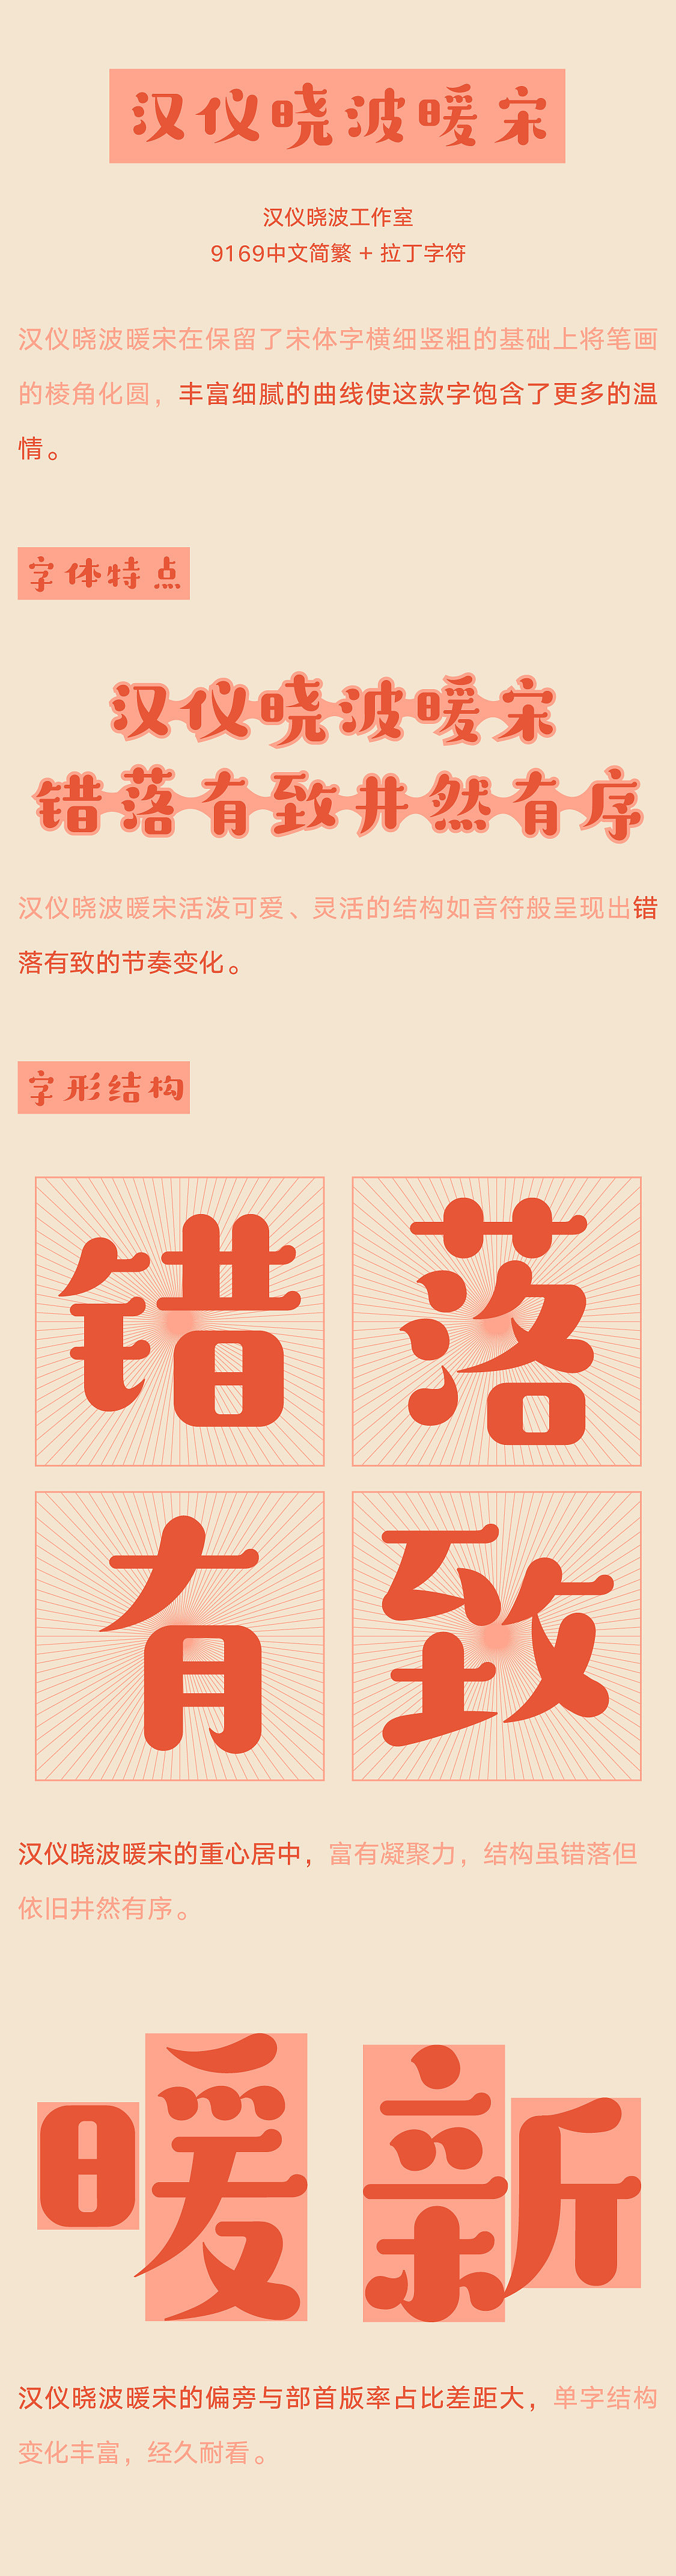 Chinese Creative Font Design-Happy Girls' Festival | Paying tribute to front-line female medical workers